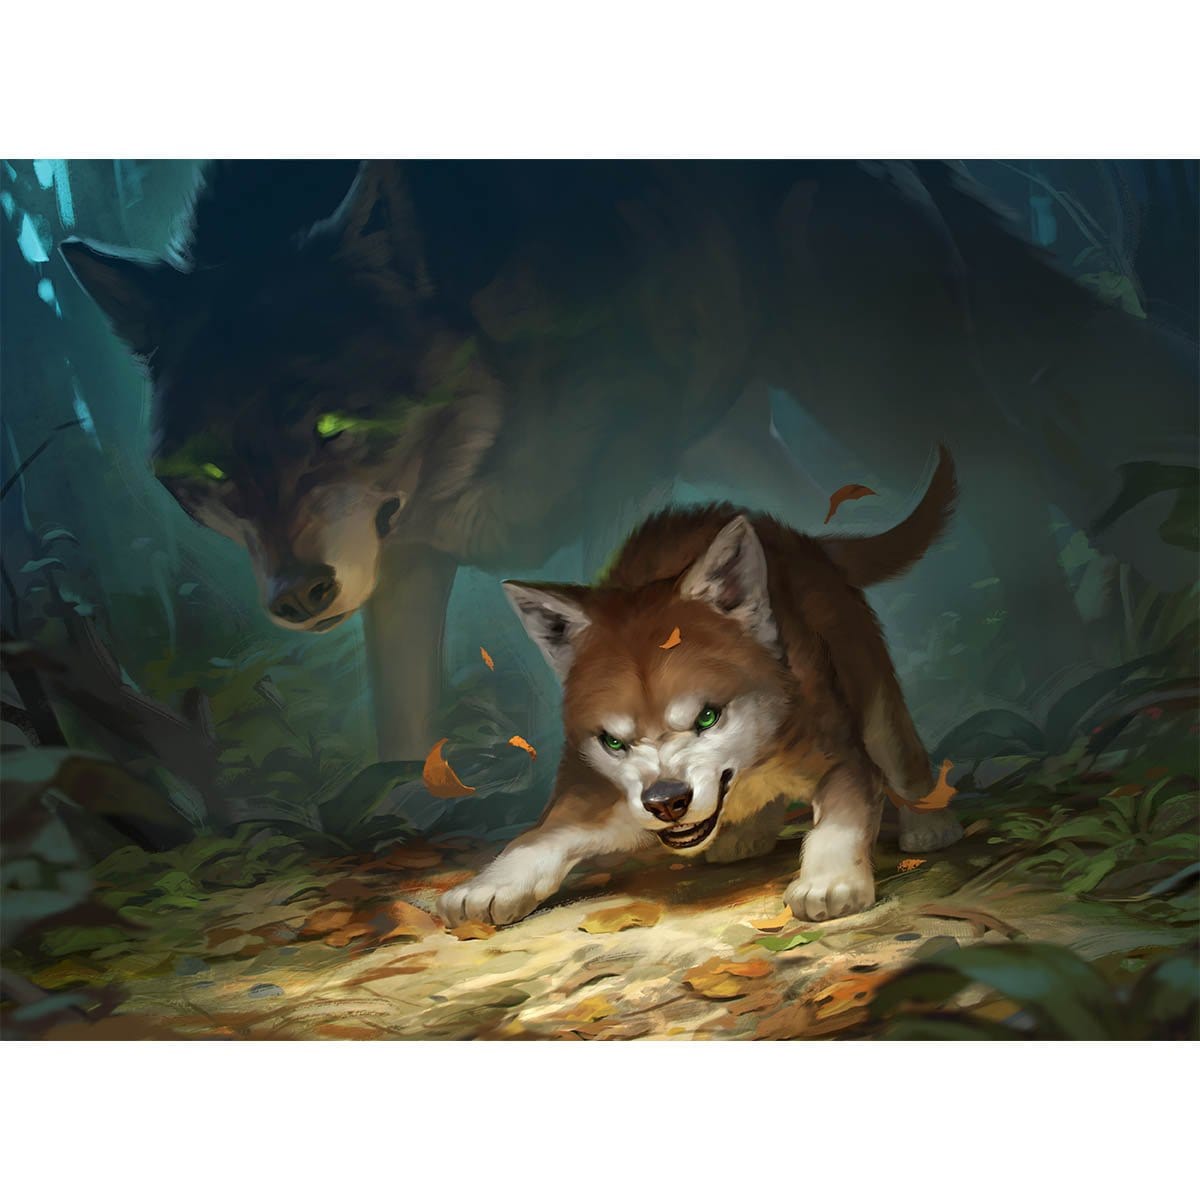 Ferocious Pup Print - Print - Original Magic Art - Accessories for Magic the Gathering and other card games